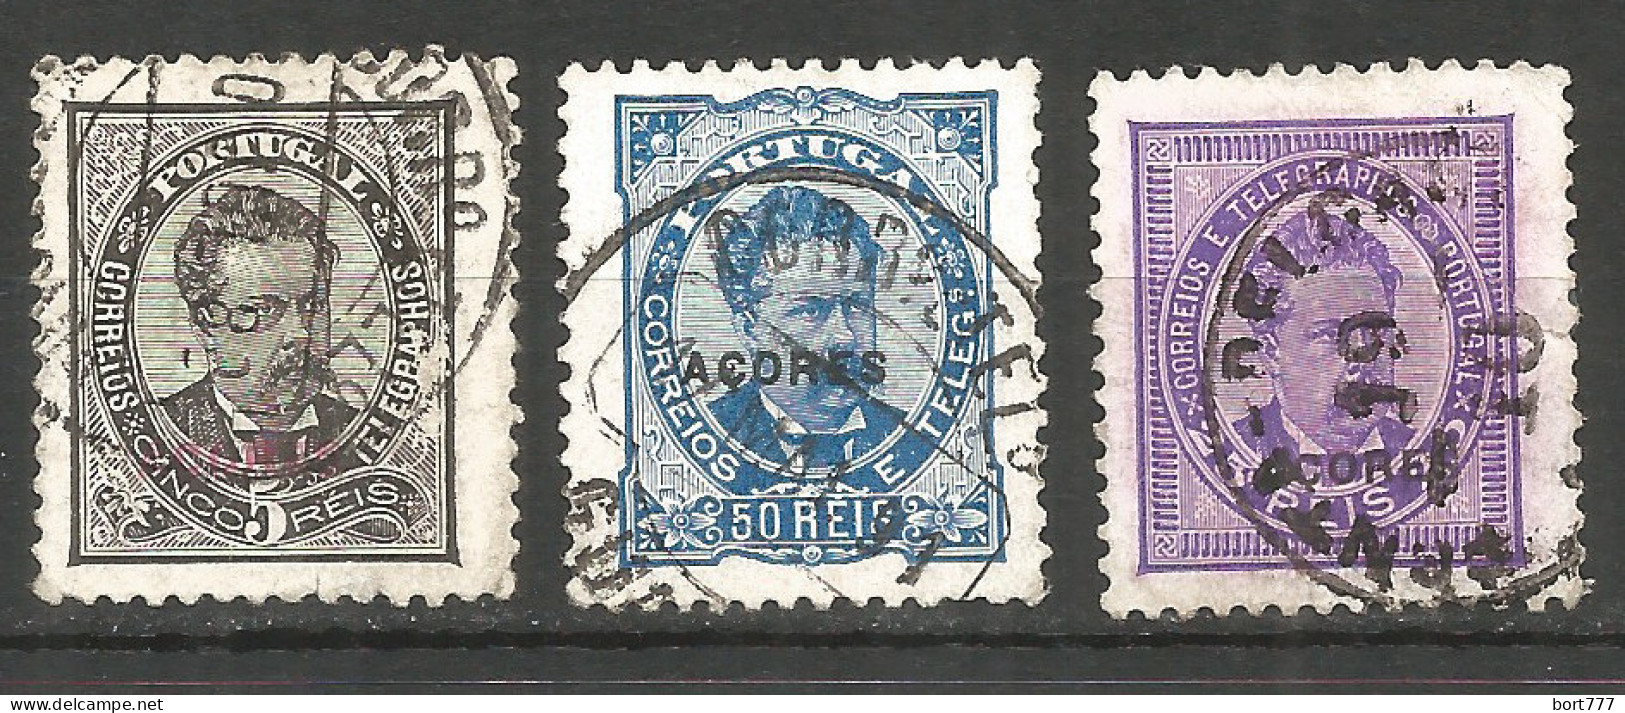 Portugal Azores 1882 Used Stamps Set  - Used Stamps